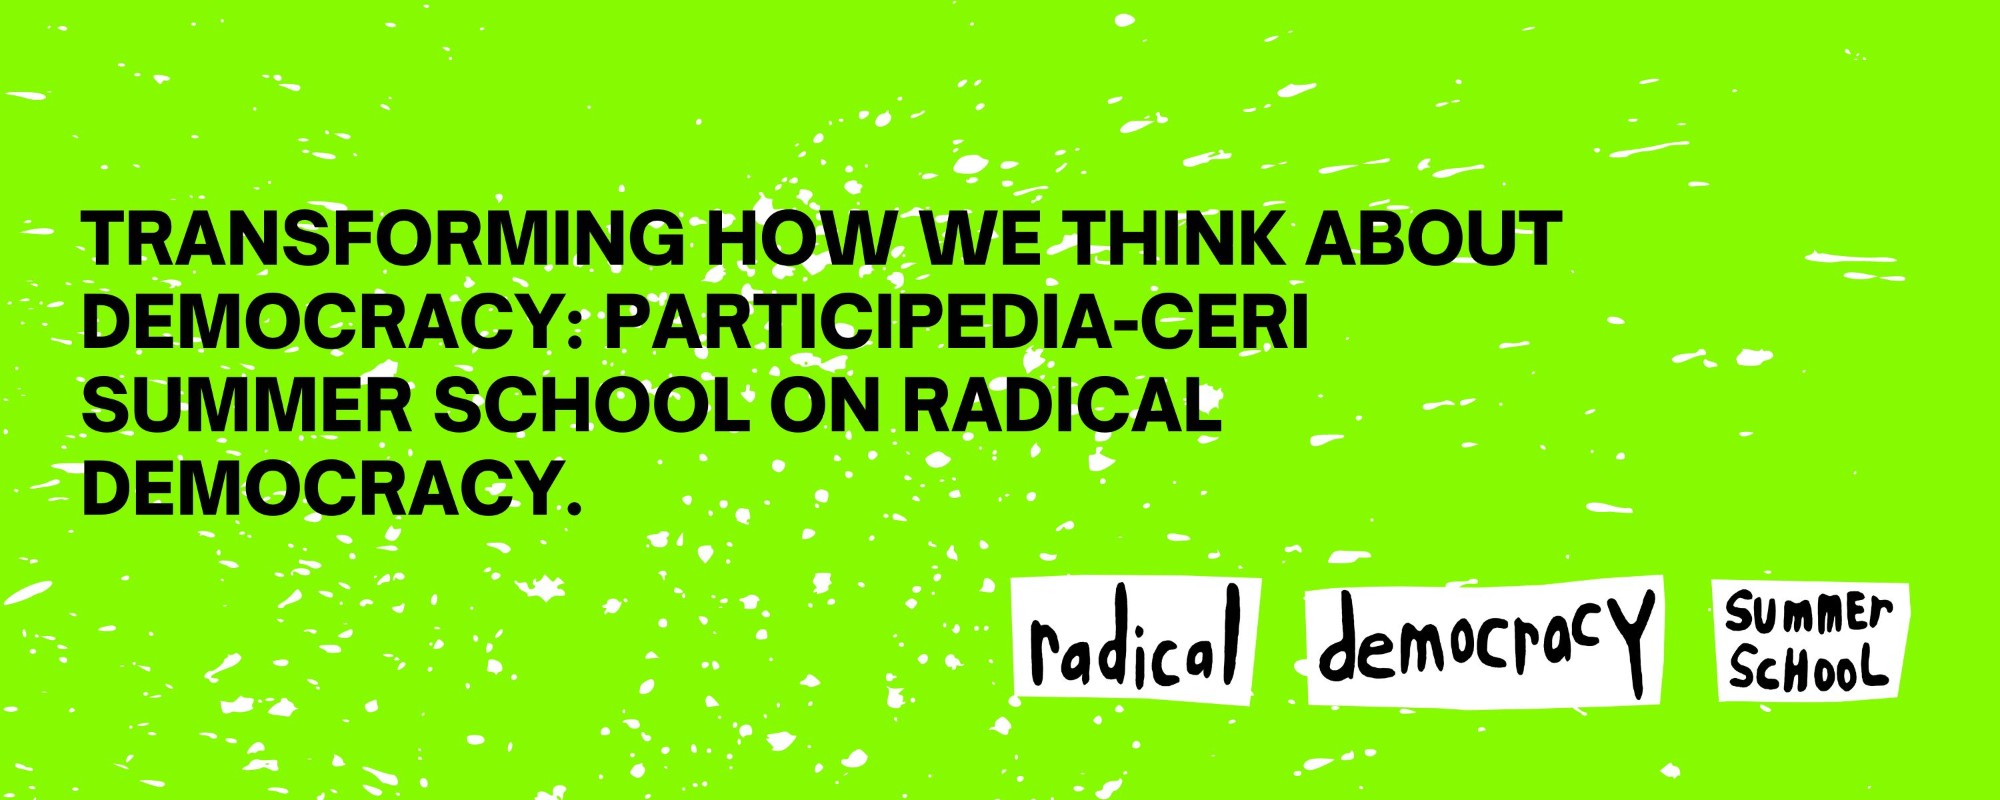 Transforming How We Think About Democracy: Participedia-CERi Summer School on Radical Democracy. - 1